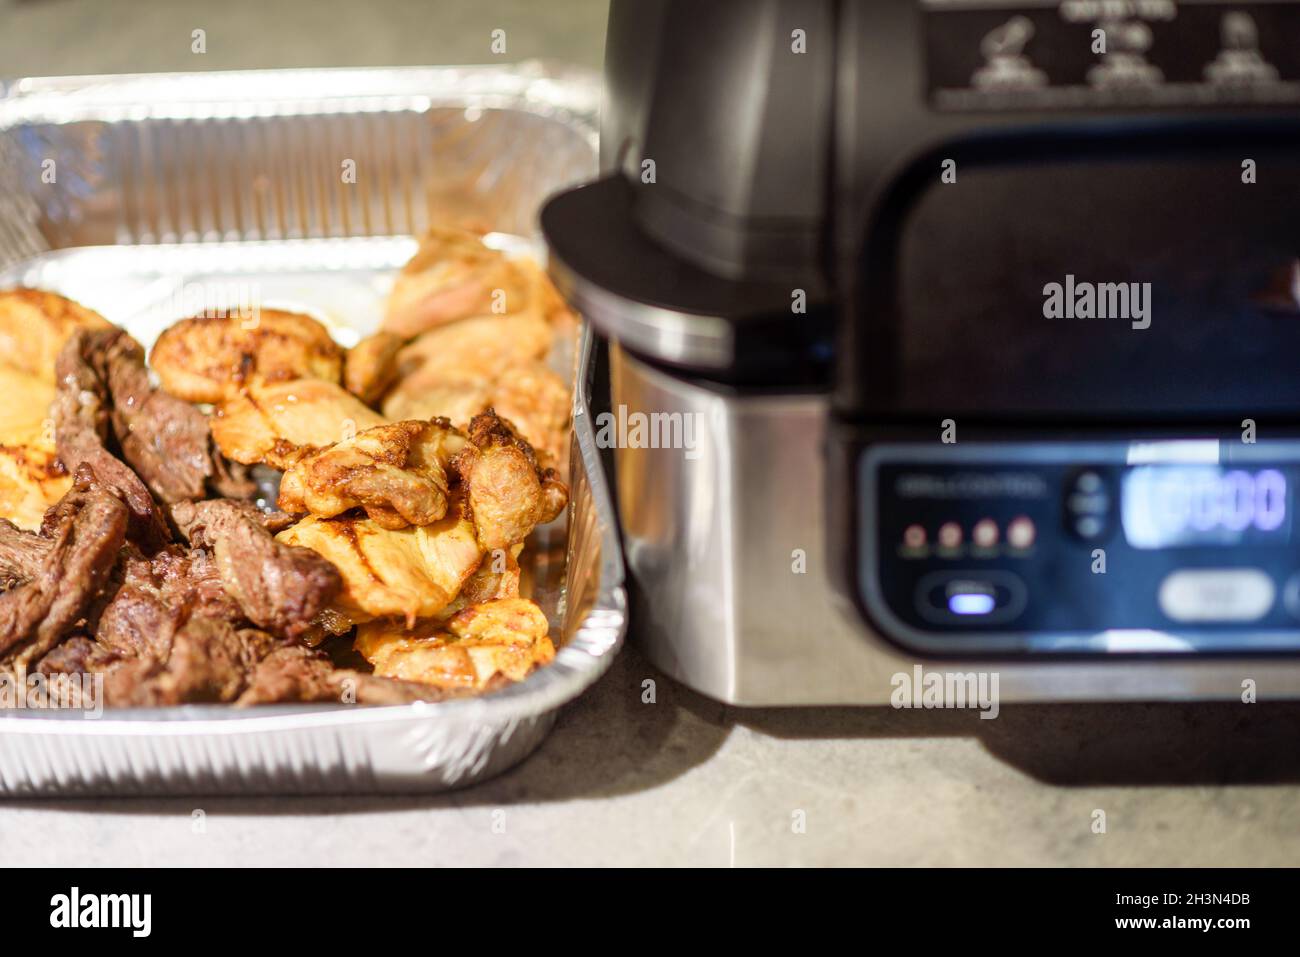 Air fryer in kitchen. Cooking meat with spices in an air fryer. Selective focus on meat in tray. Stock Photo